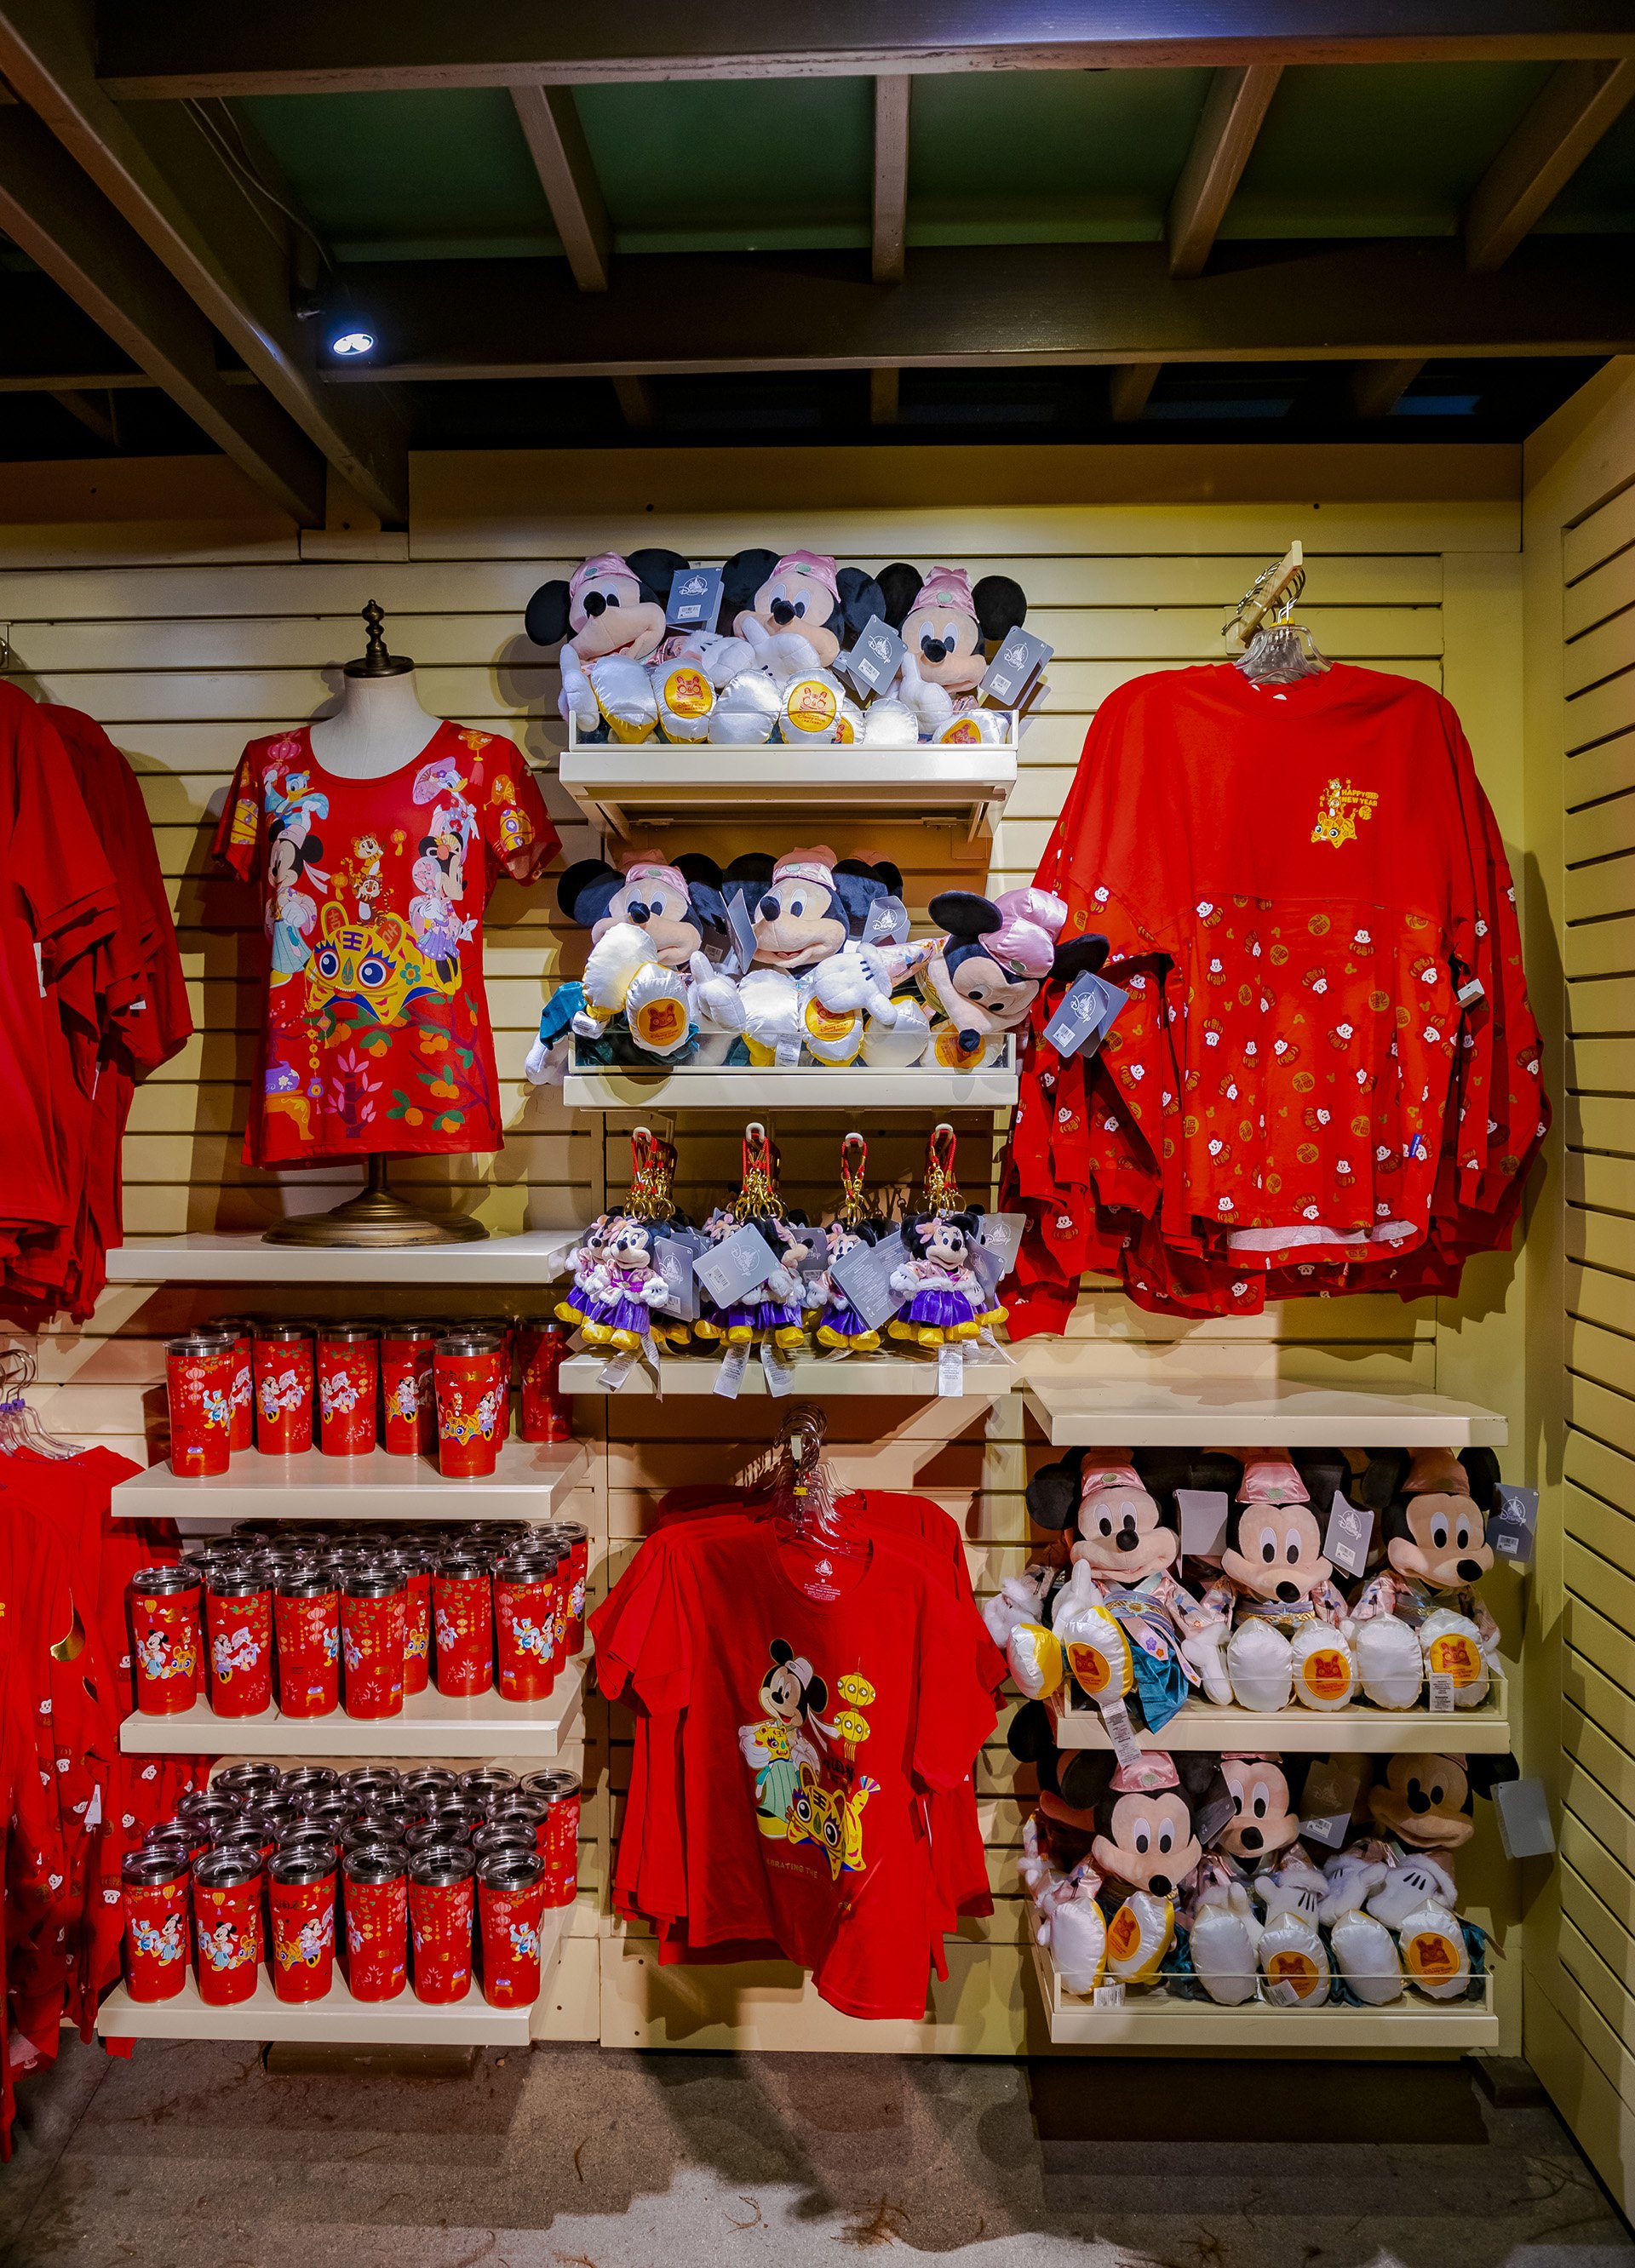  As with all of DCA’s festivals, there is official seasonl Disney merchandise for sale at the stand located by the entrance of the Little Mermaid ride. 